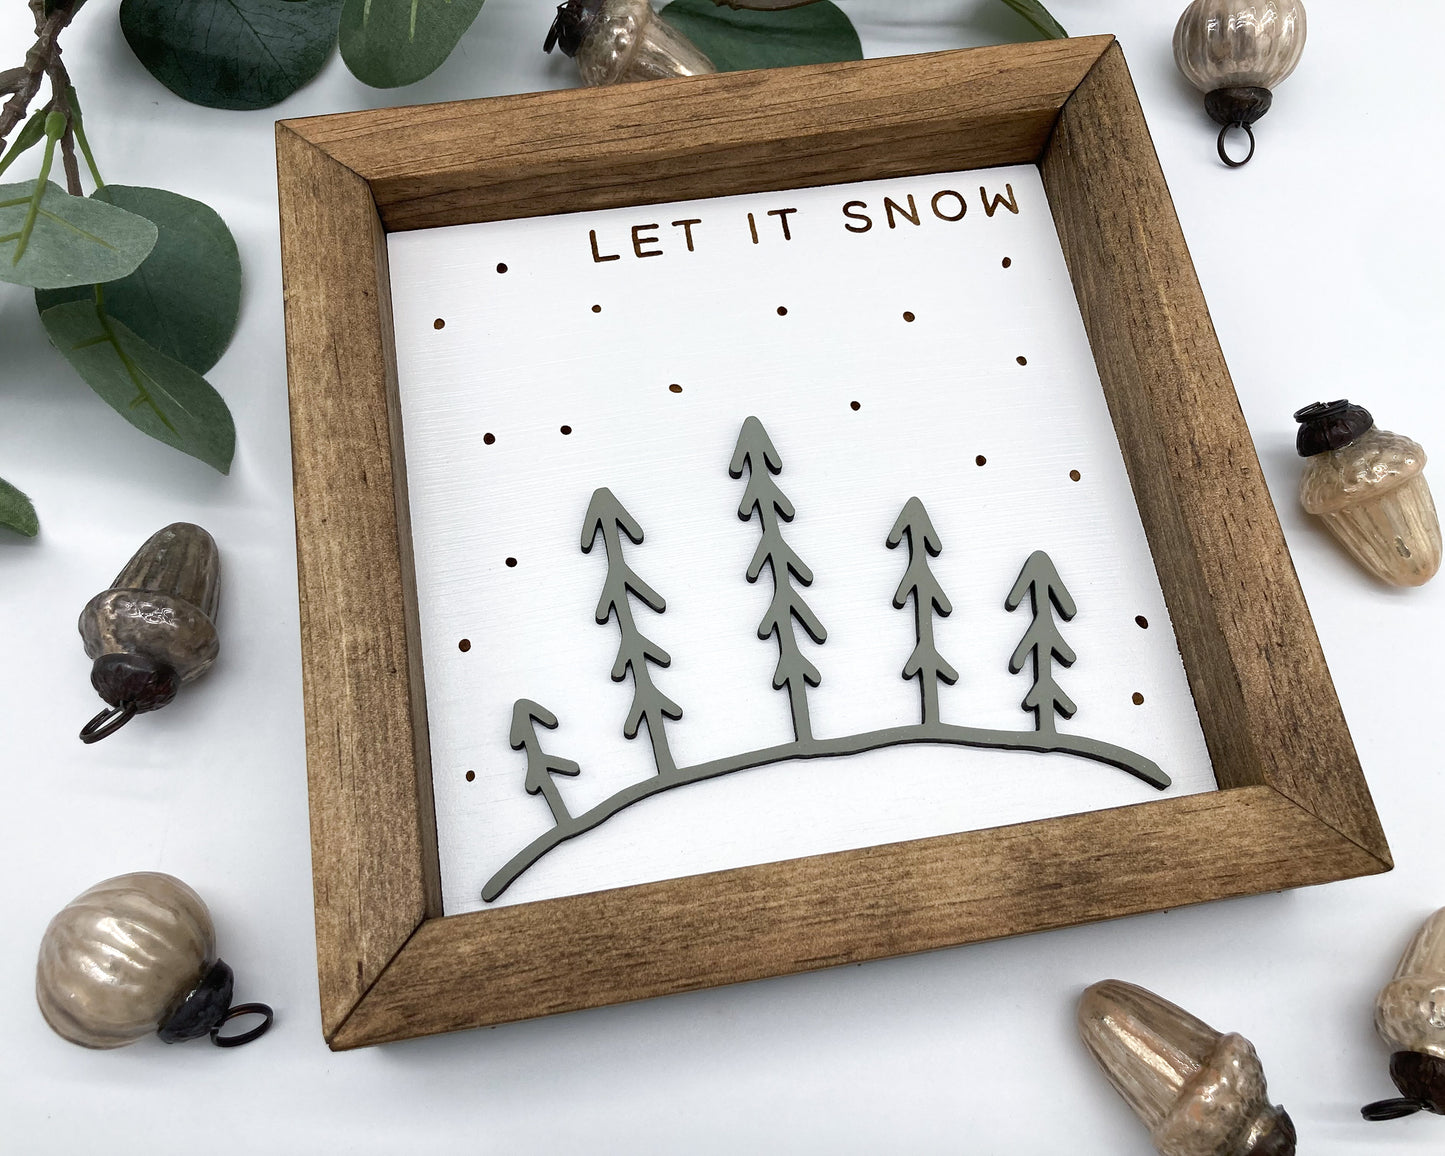 "Let It Snow" Christmas Wood Sign